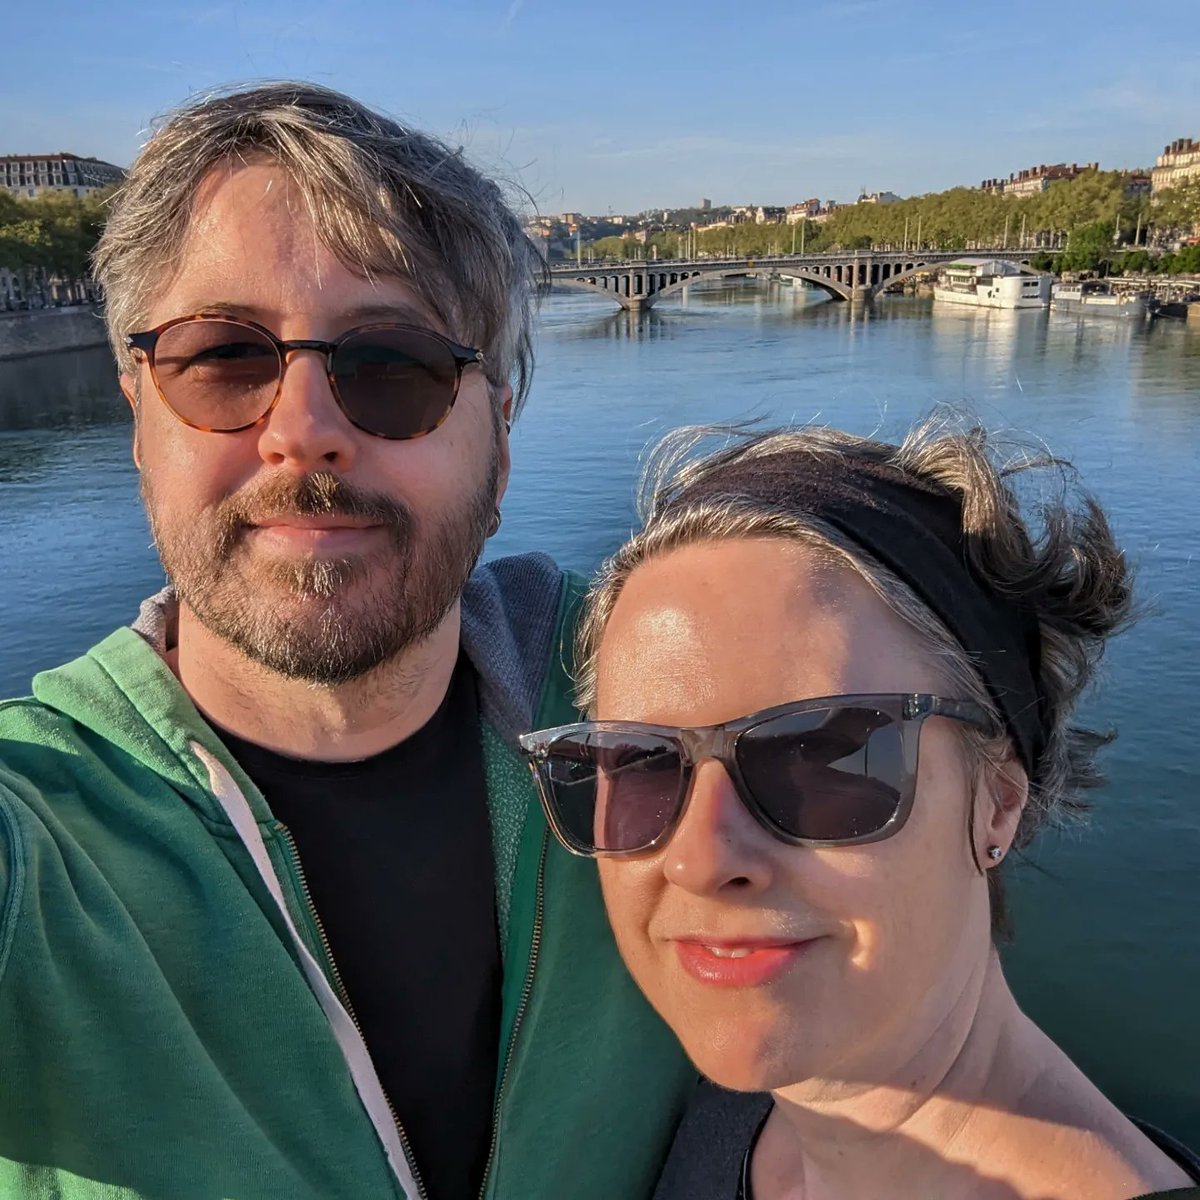 Enjoyed a pleasant walk around town with my wife the other evening. Our days in France will soon be numbered, so it's nice to take in the sights (and flavors) while we're here.